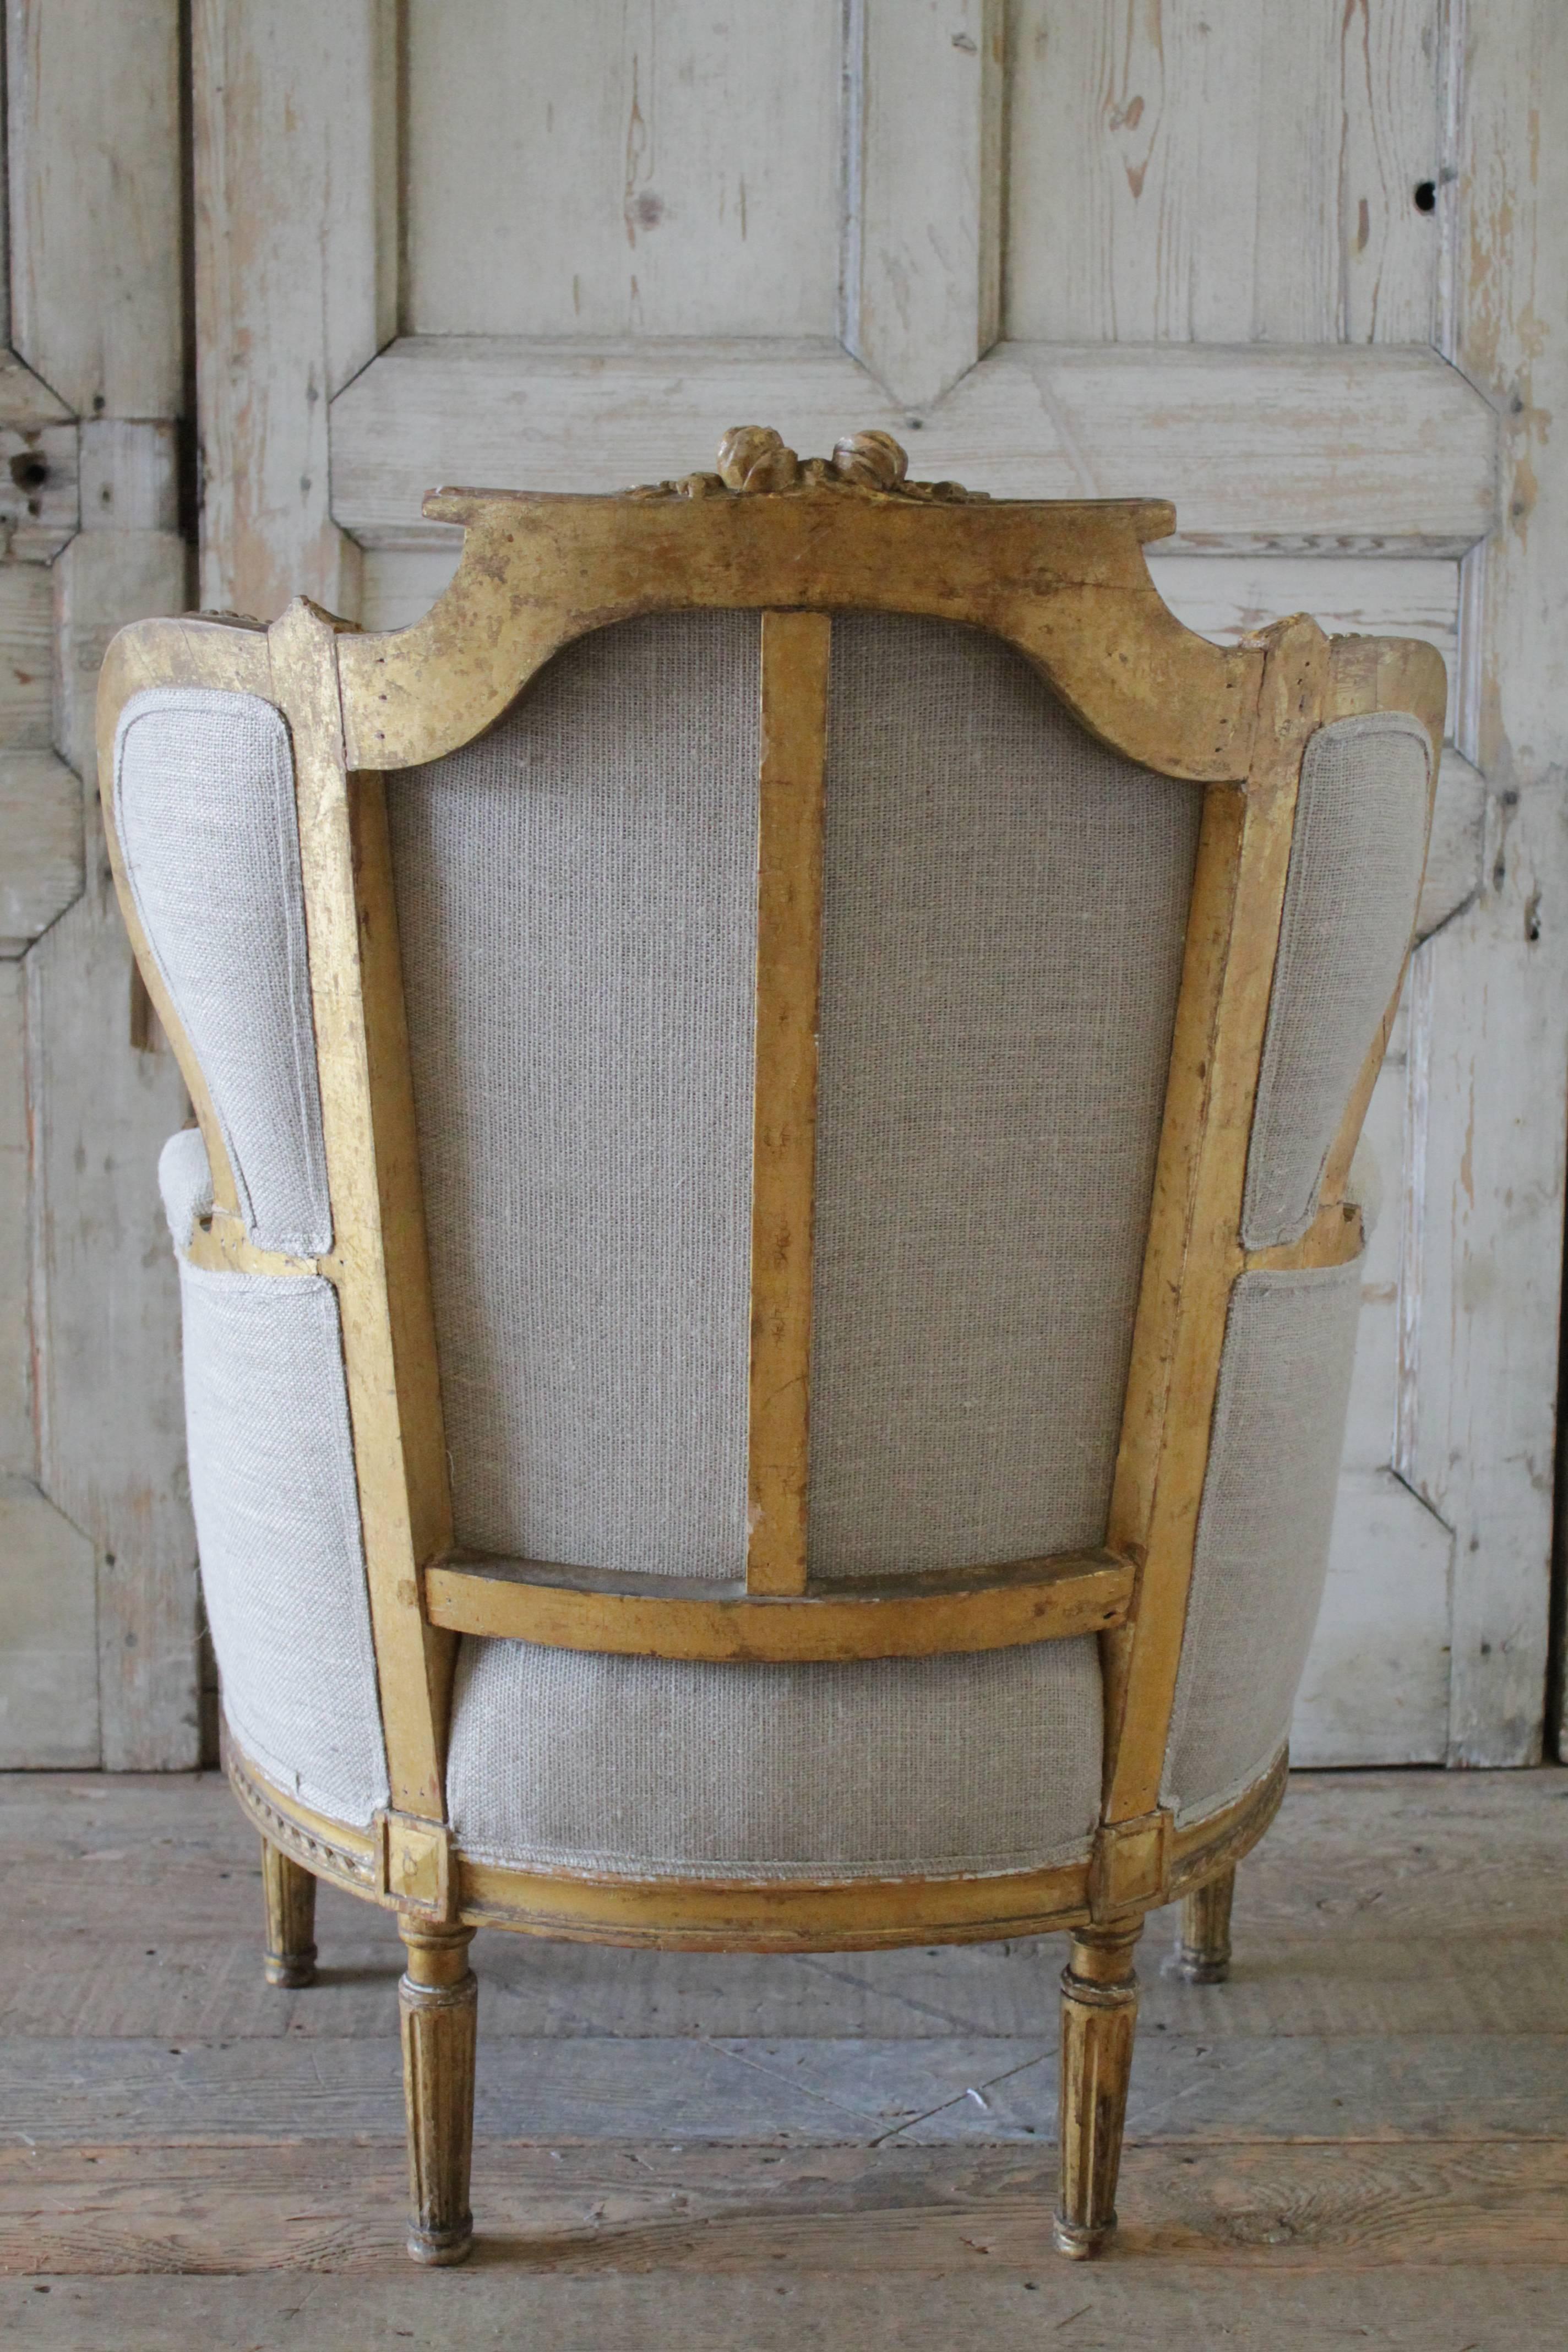 19th Century Antique French Louis XVI Style Wing Chair in Antique Grain Sack Upholstery